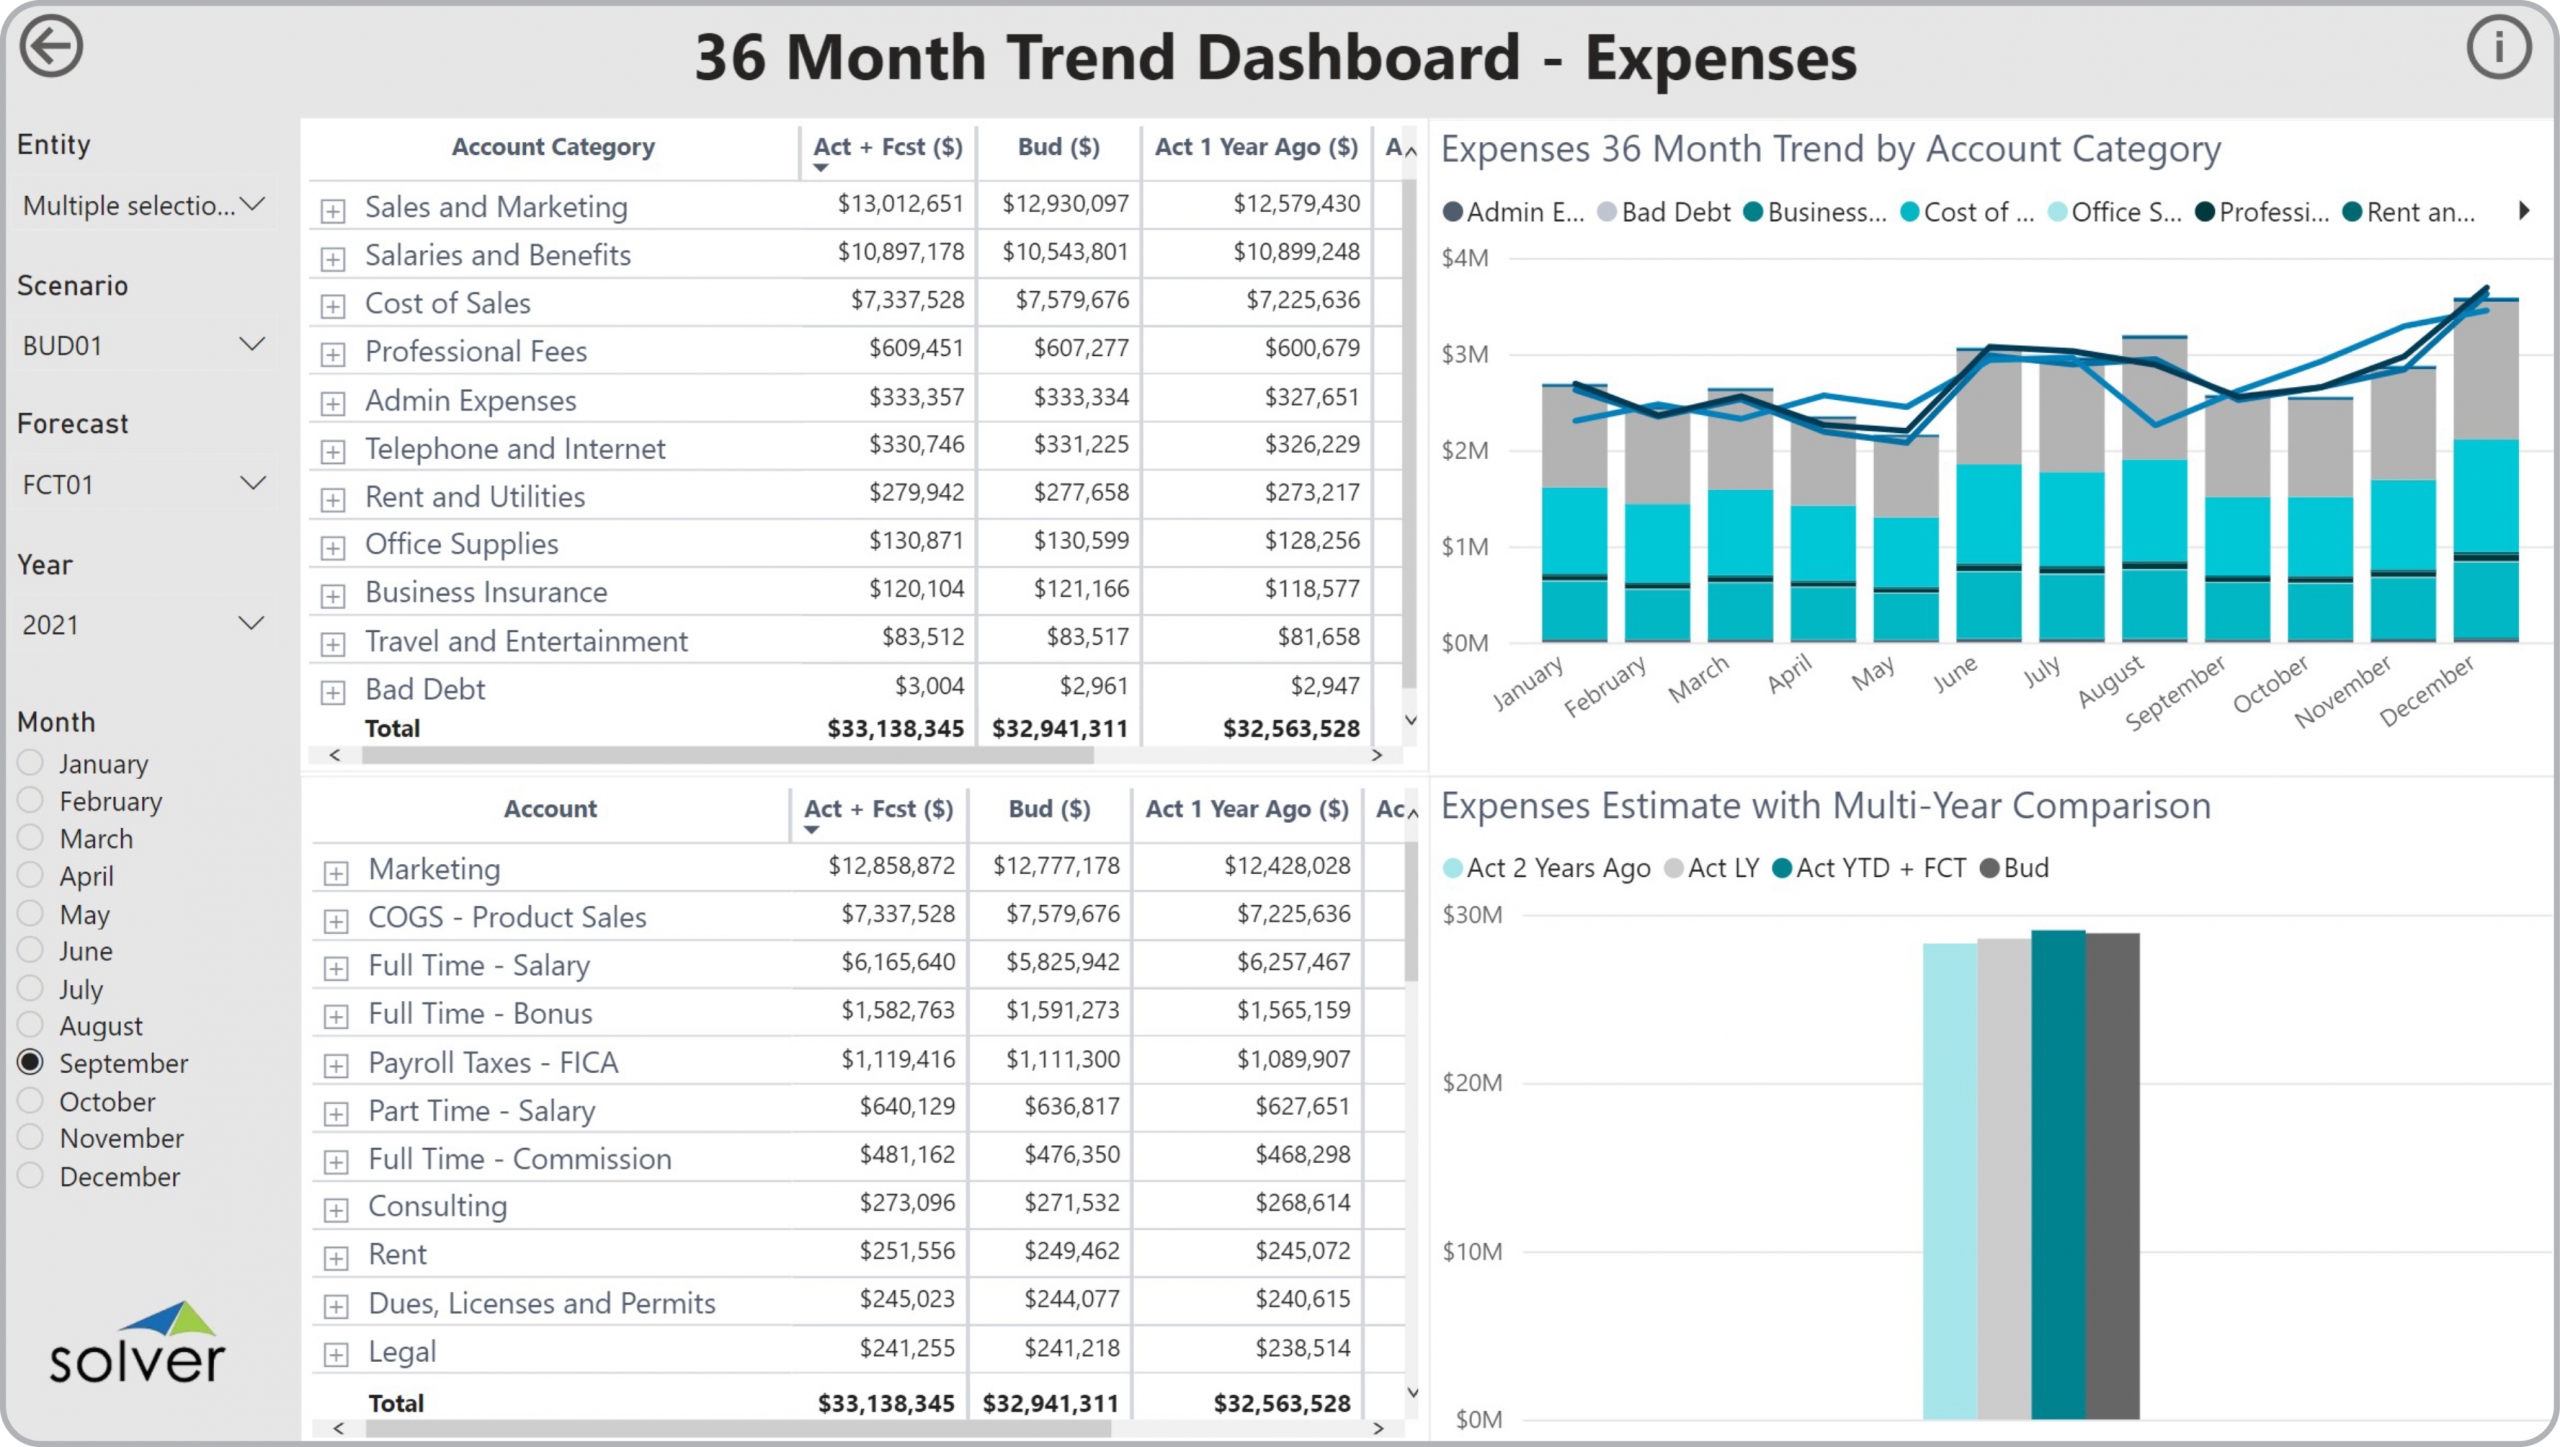 Example of a 36 Month Expense Trend Dashboard to Streamline the Monthly Reporting Process